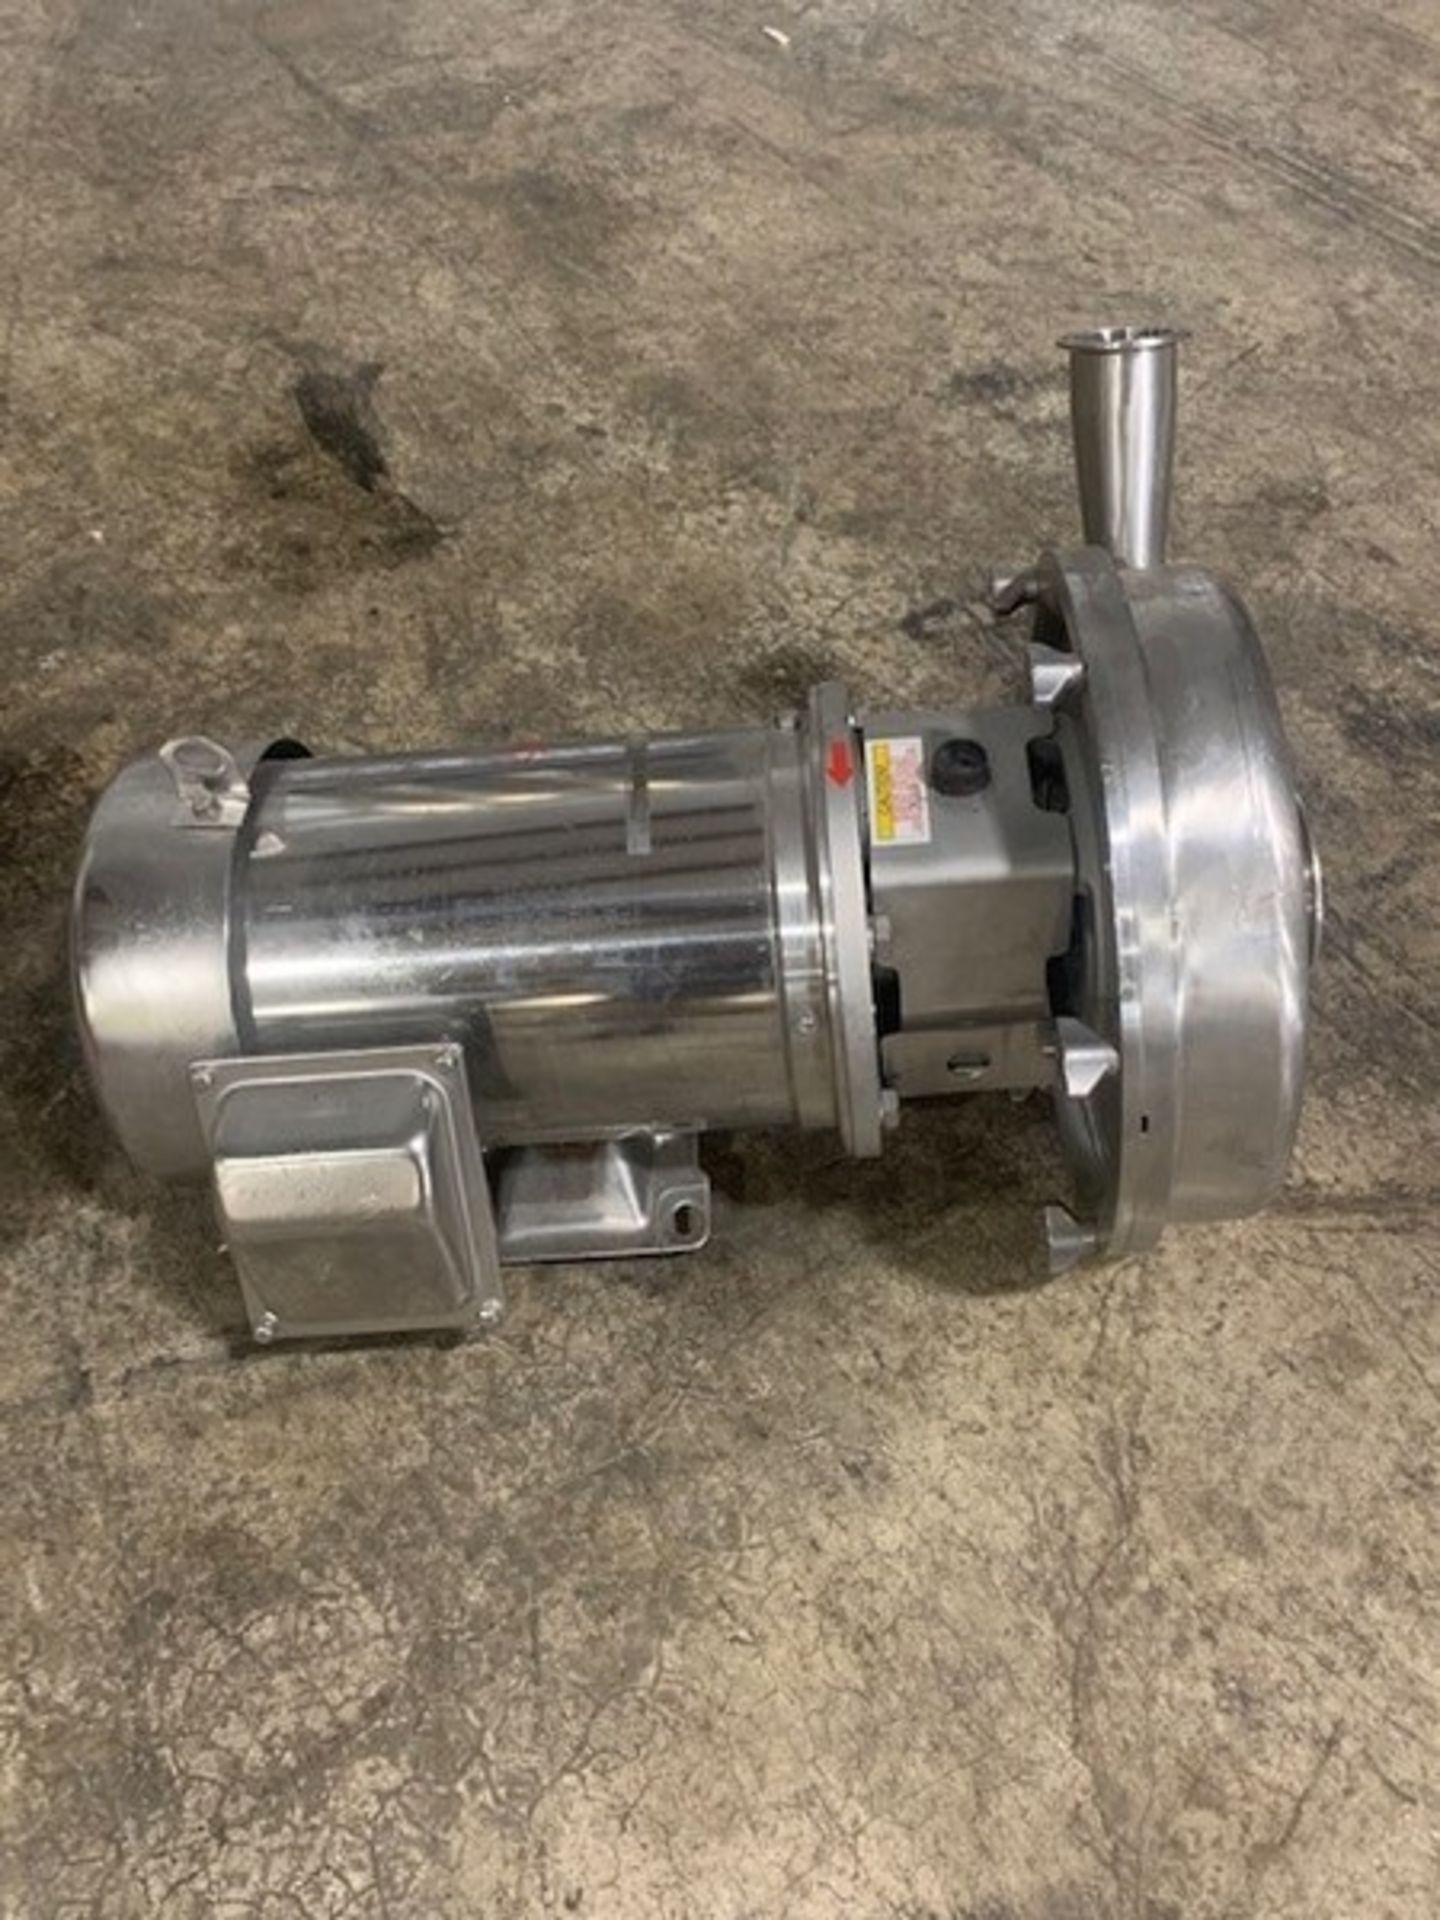 2x3 Alfa laval LKH 20 centrifugal pump, equipped with a sterling 5hp electric motor with 1760